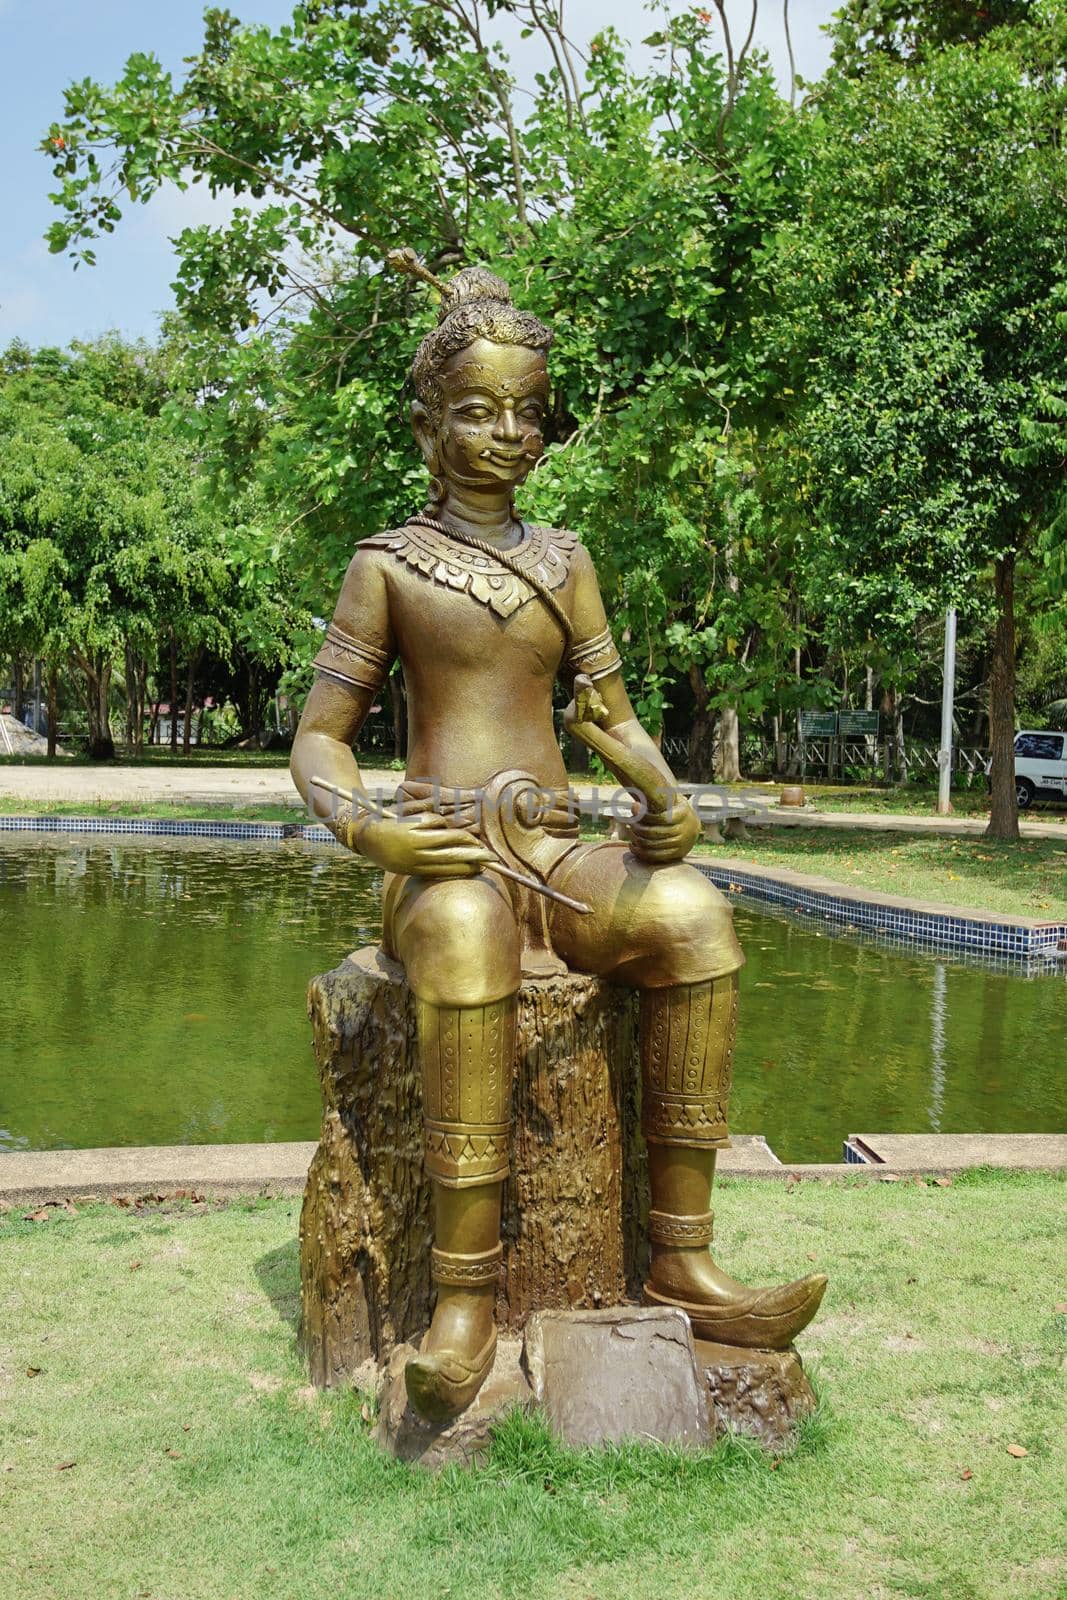 Rayong, Thailand - April 13, 2021: Sin Samudr is main character in The famous Thai poet Phra Aphai Mani at Phra Sunthonwohan park known as Sunthorn Phu park in Rayong, Thailand.